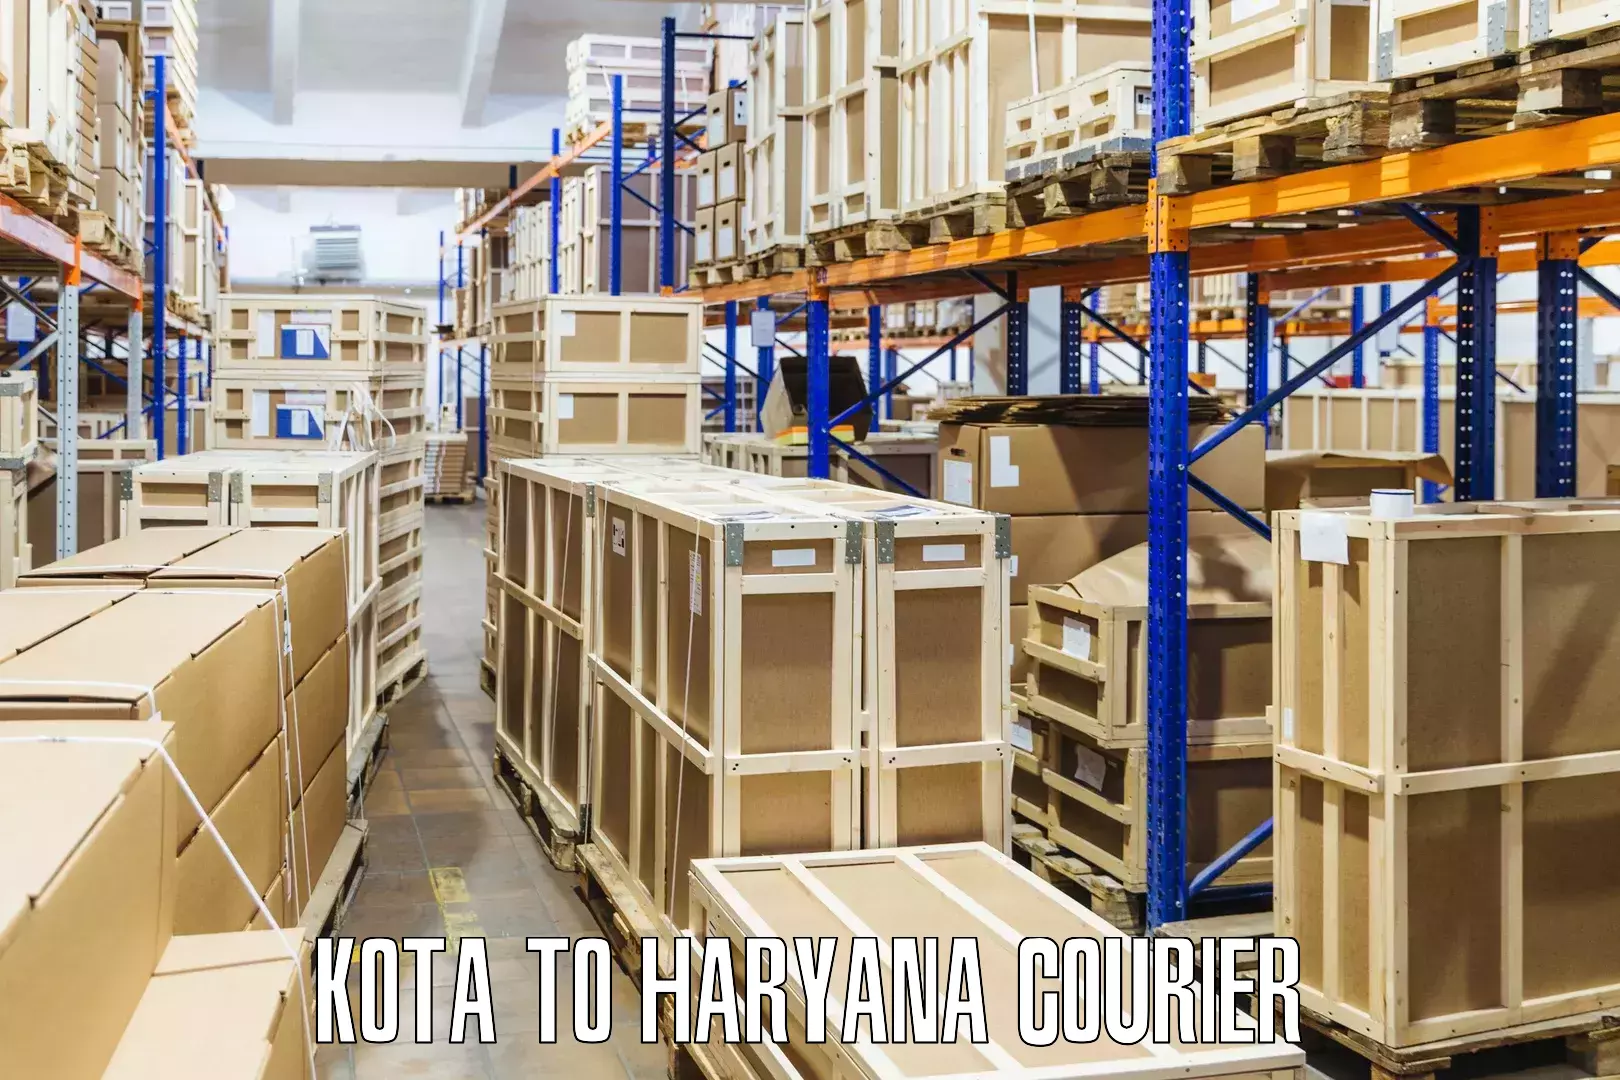 Reliable delivery network Kota to Haryana